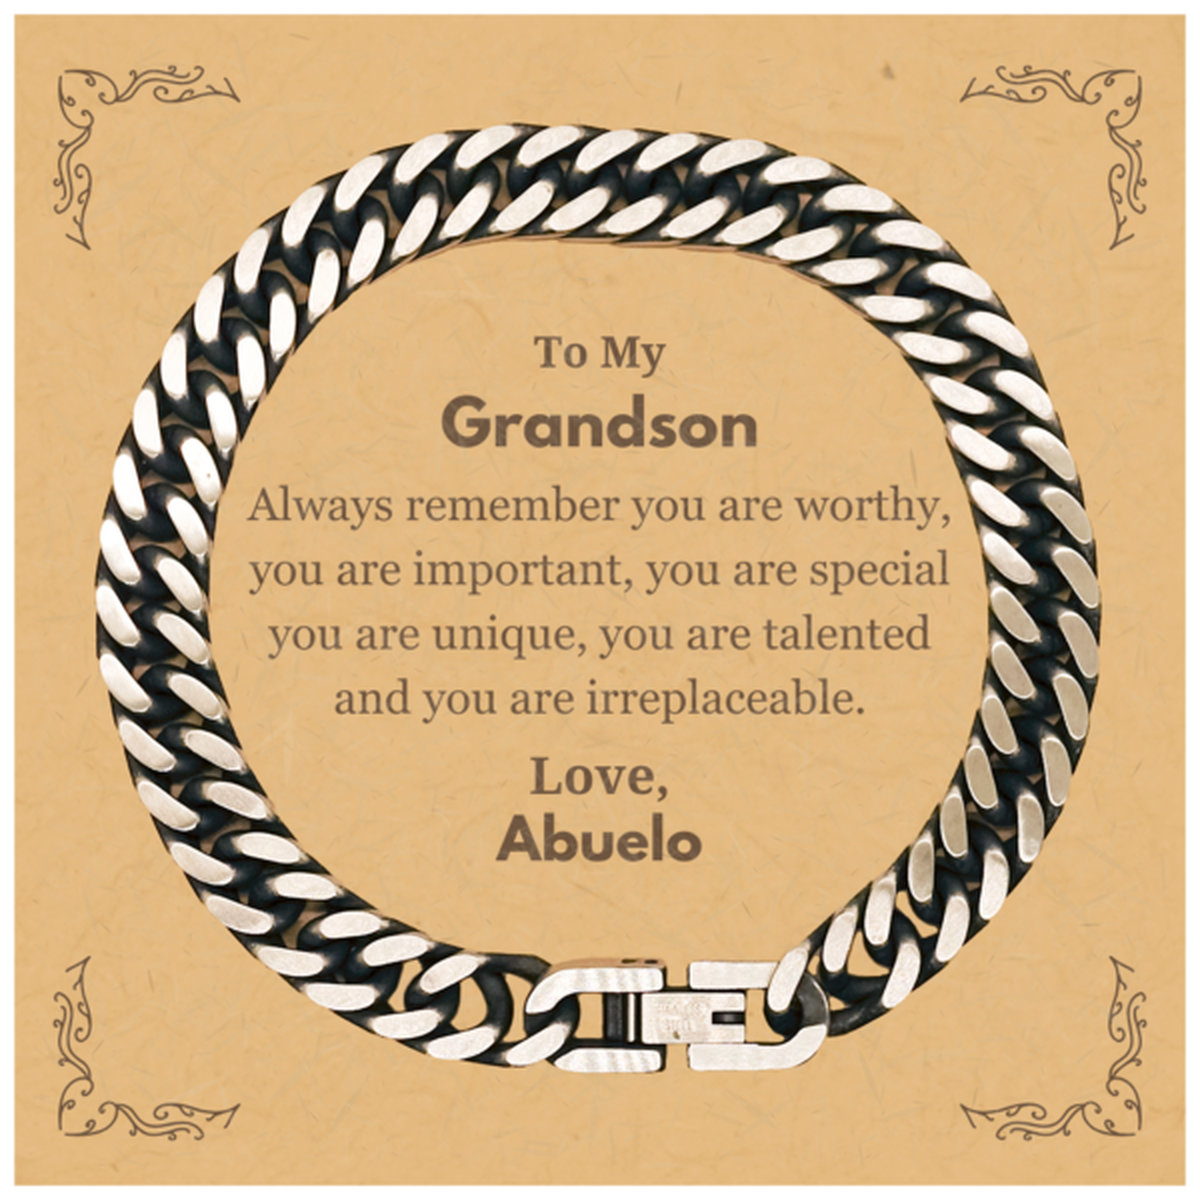 Grandson Birthday Gifts from Abuelo, Inspirational Cuban Link Chain Bracelet for Grandson Christmas Graduation Gifts for Grandson Always remember you are worthy, you are important. Love, Abuelo